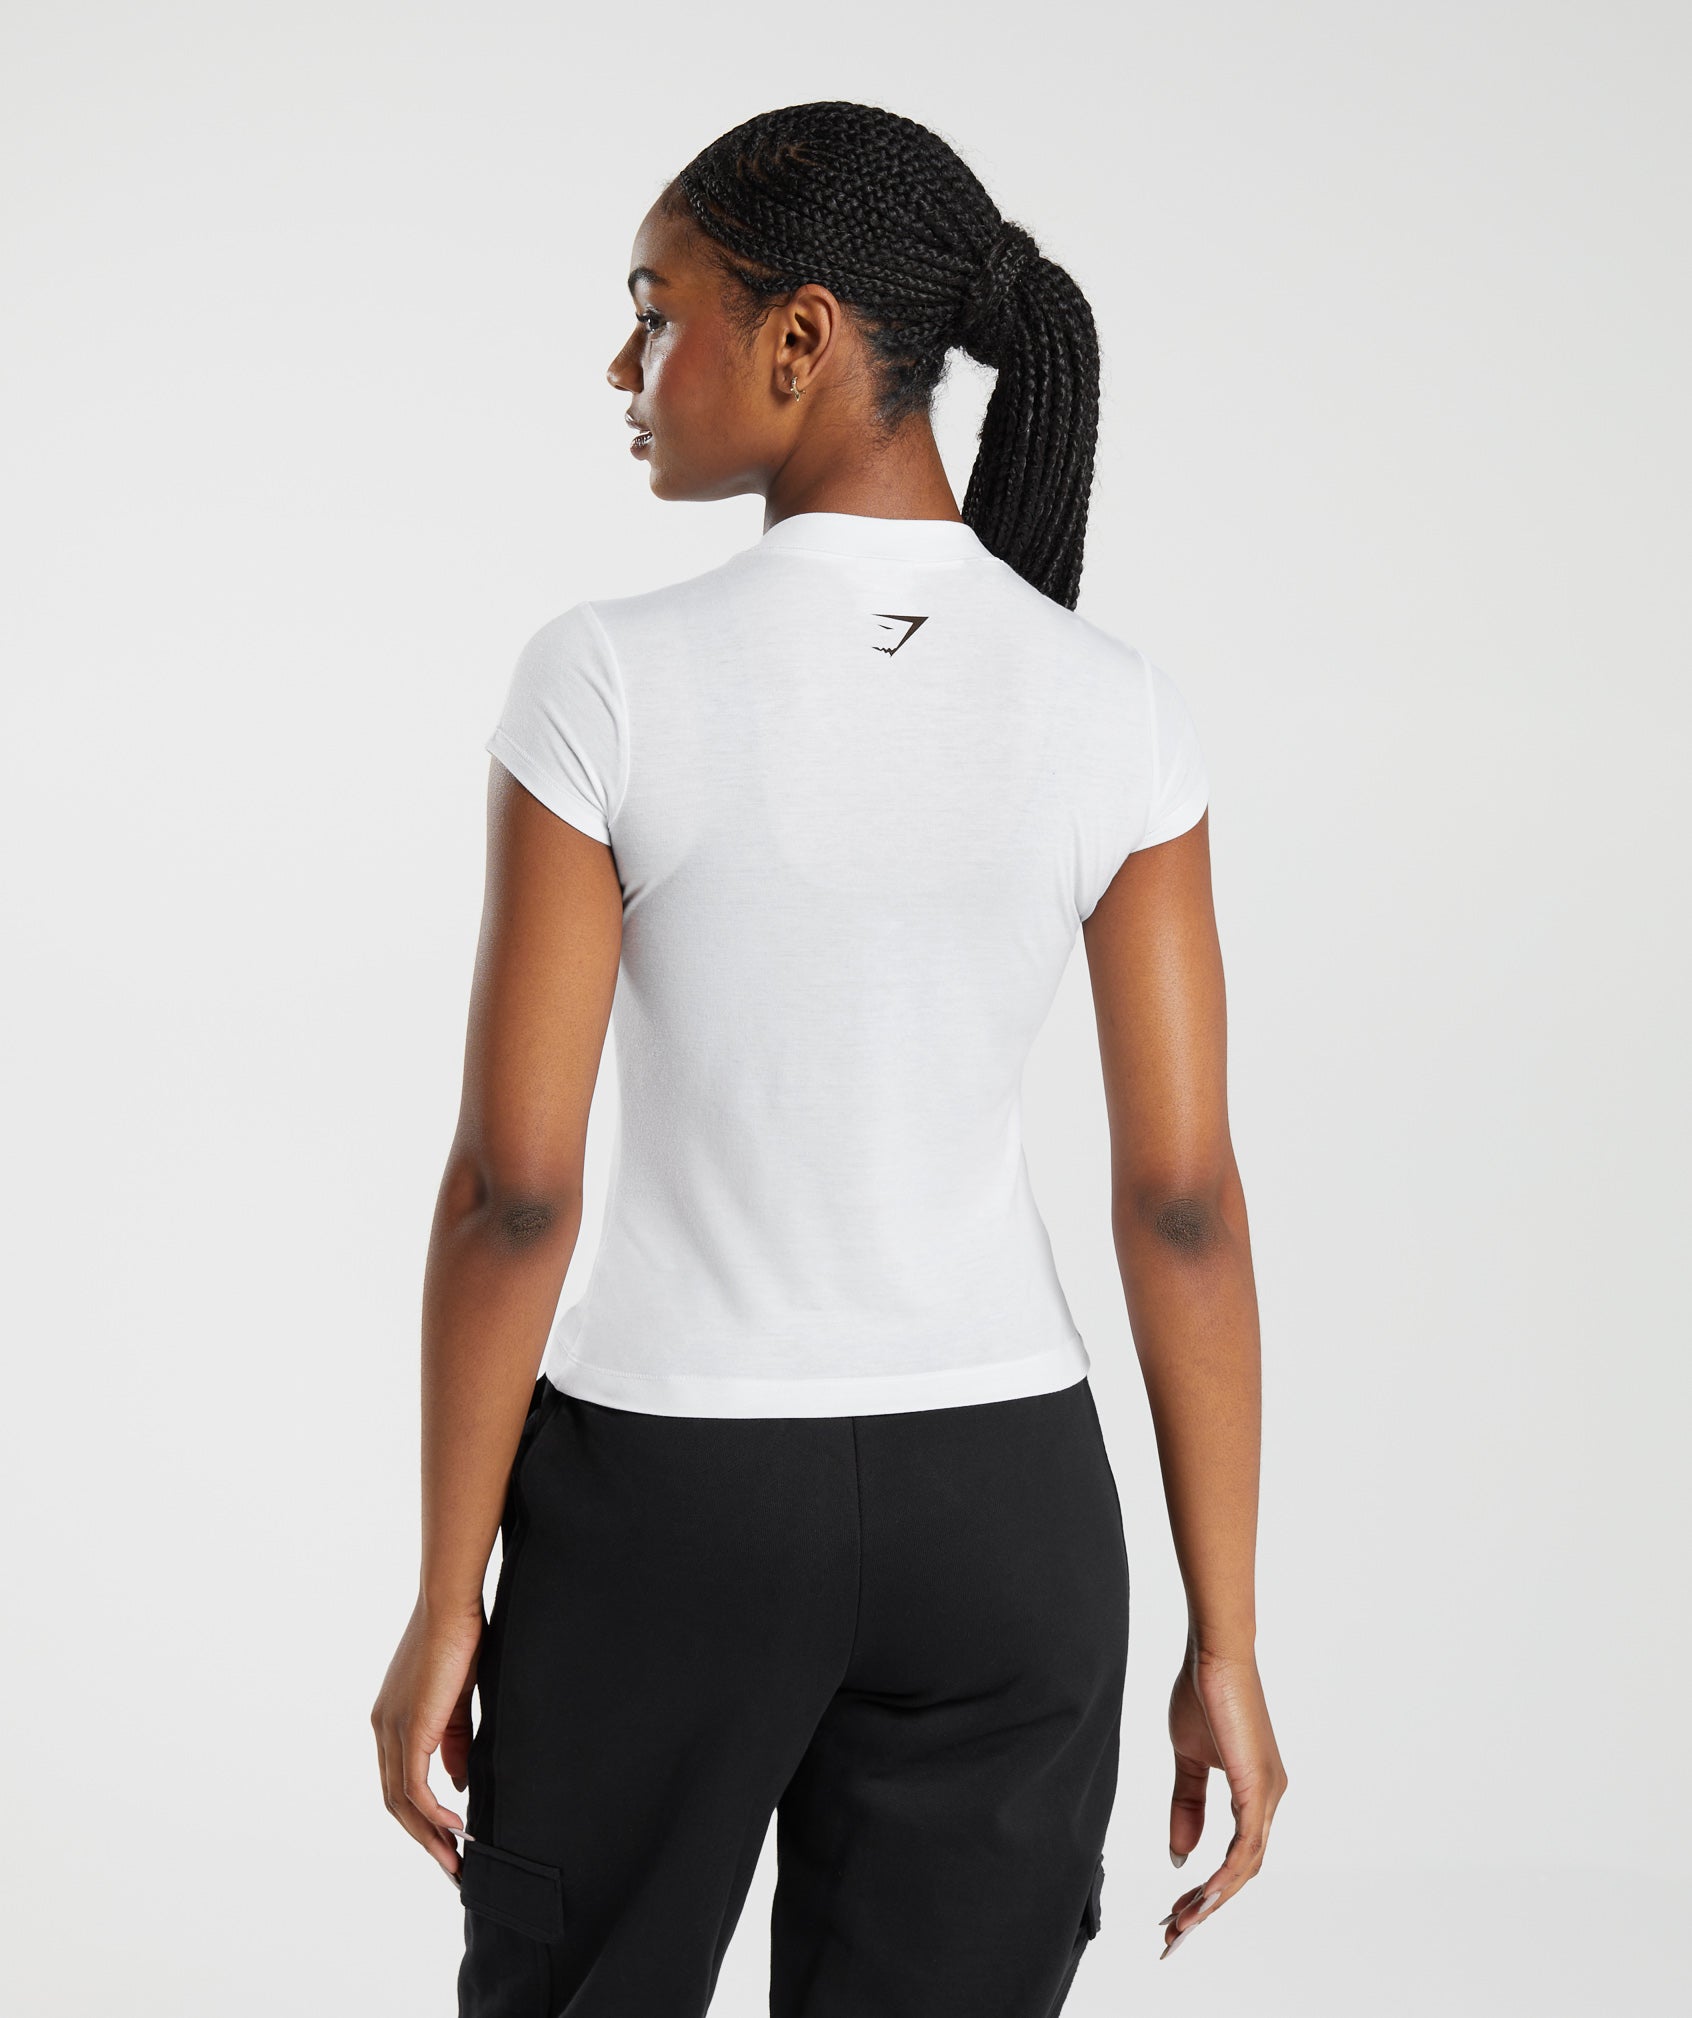 Phys Ed Graphic Body Fit T-Shirt in White - view 4